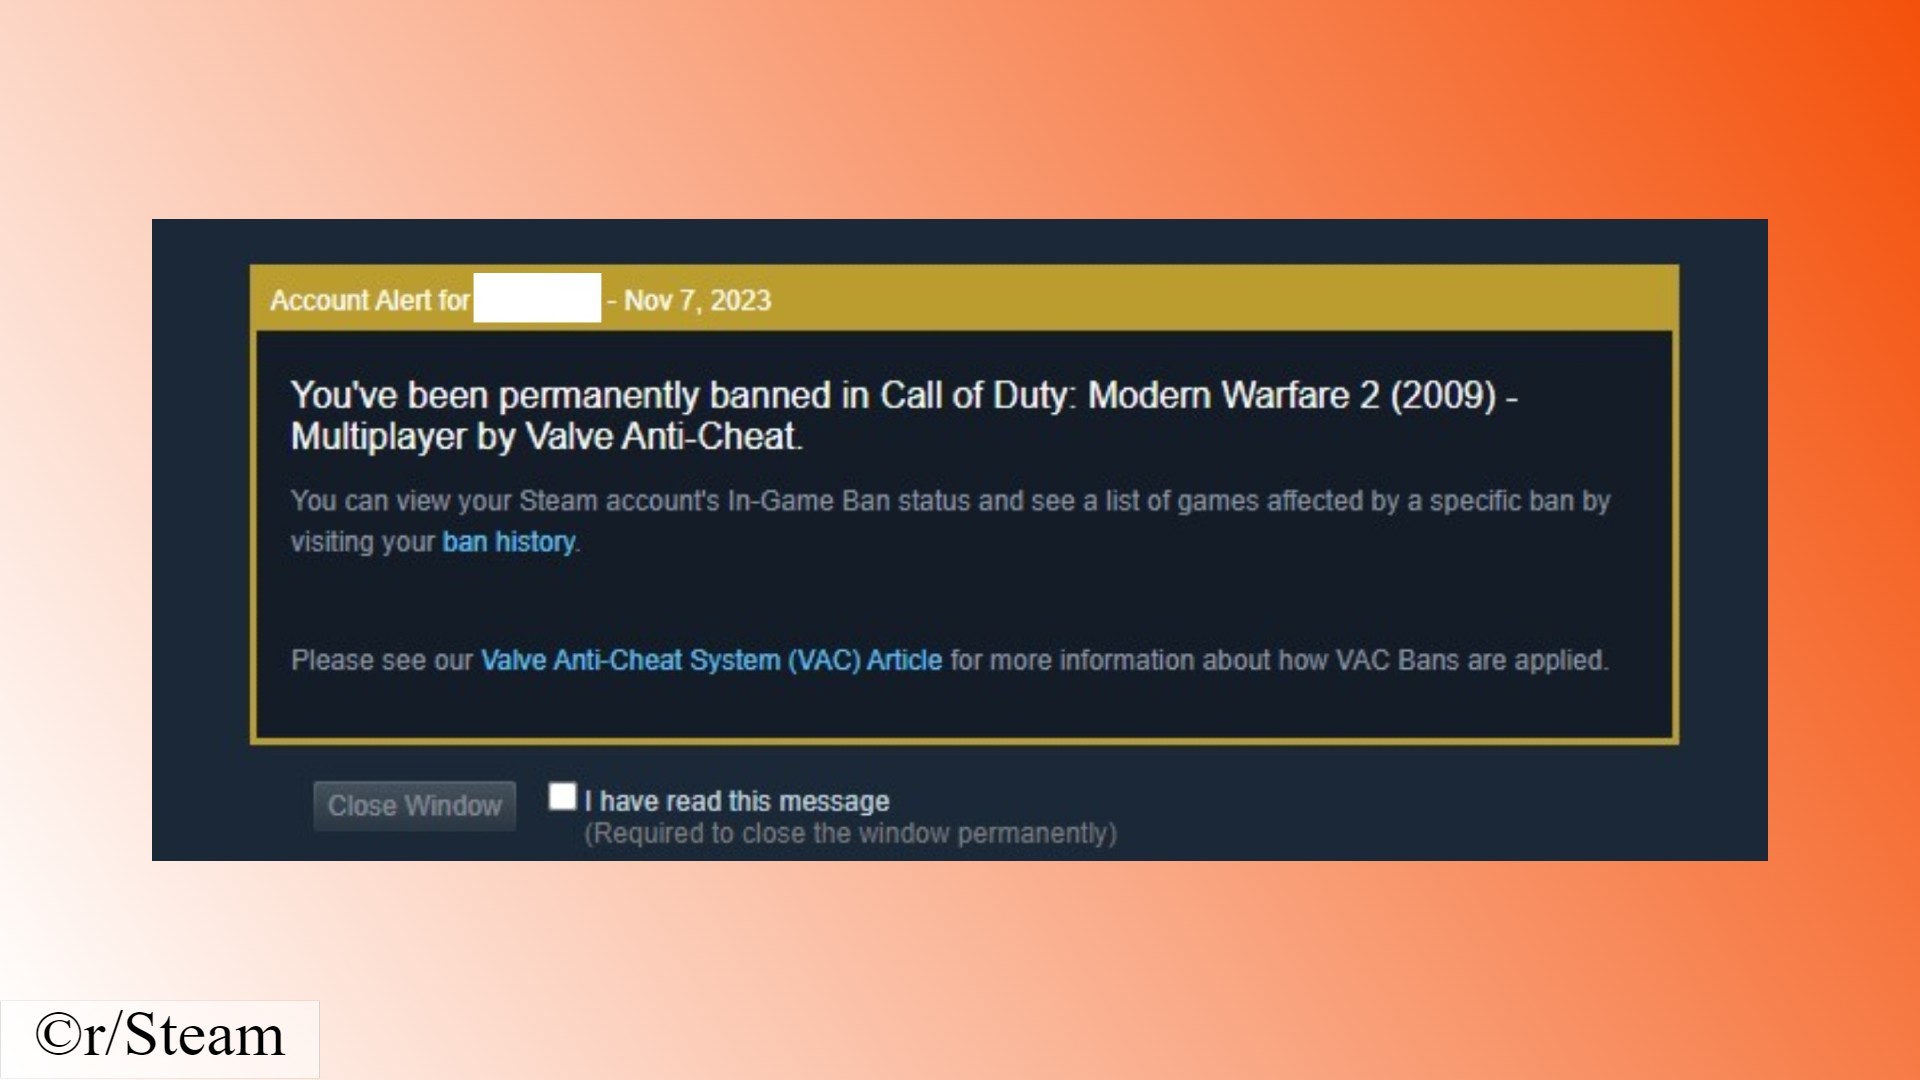 Counter-Strike Steam bans: A notification from VAC about a ban in FPS game Call of Duty Modern Warfare 2